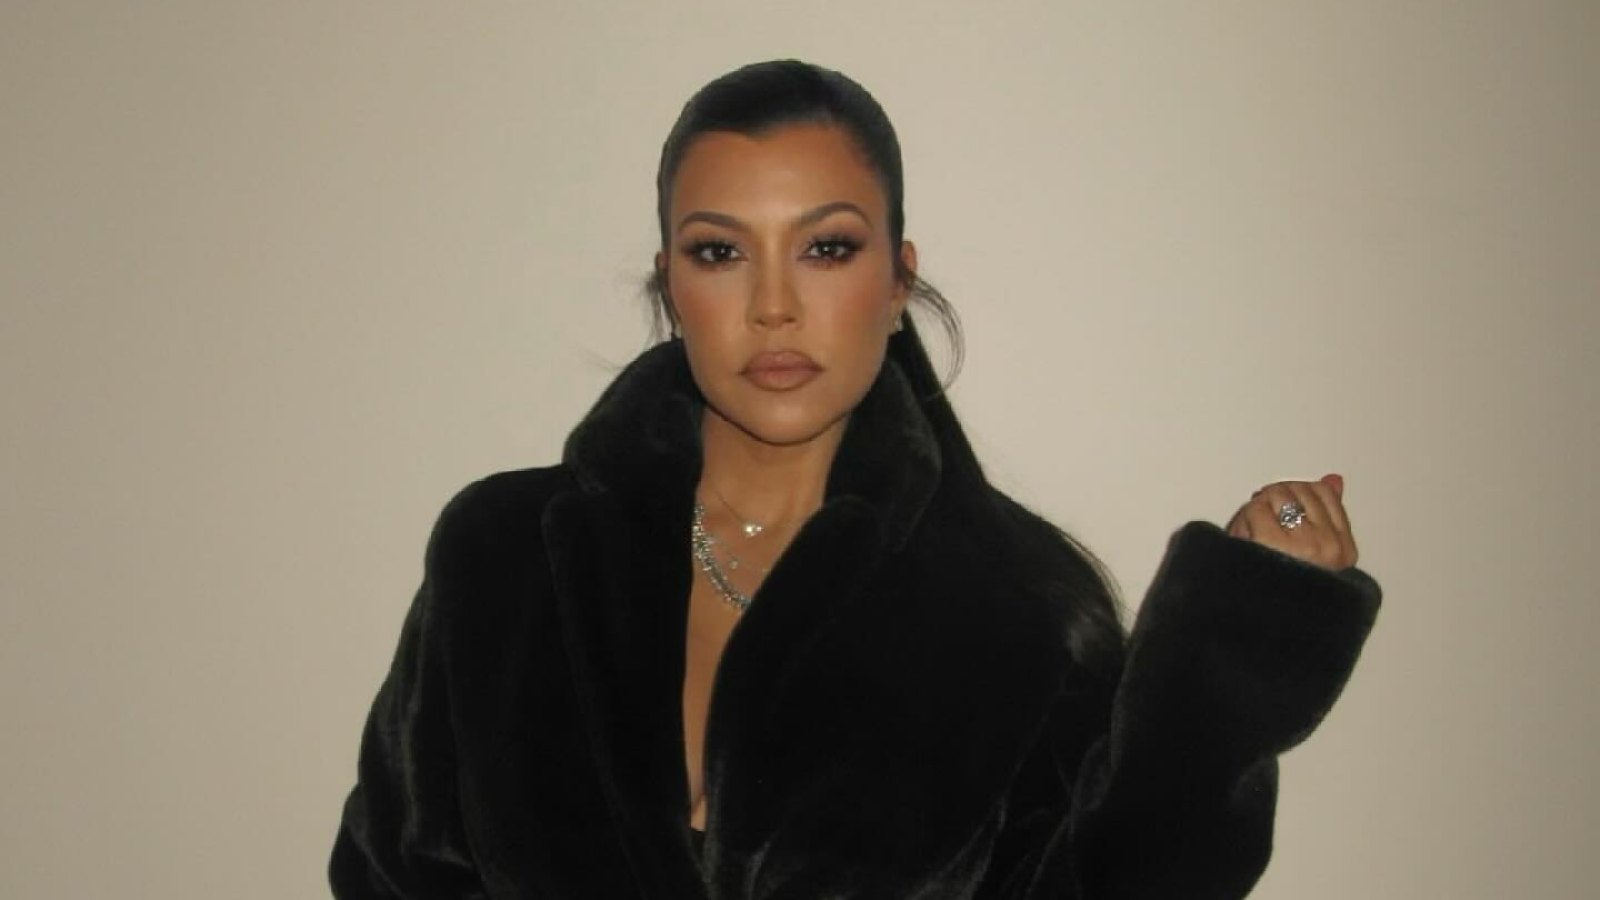 FEATURE Kourtney Kardashian Threw on a Cozy Coat for Christmas Because Her Boobs Are Filled With Milk